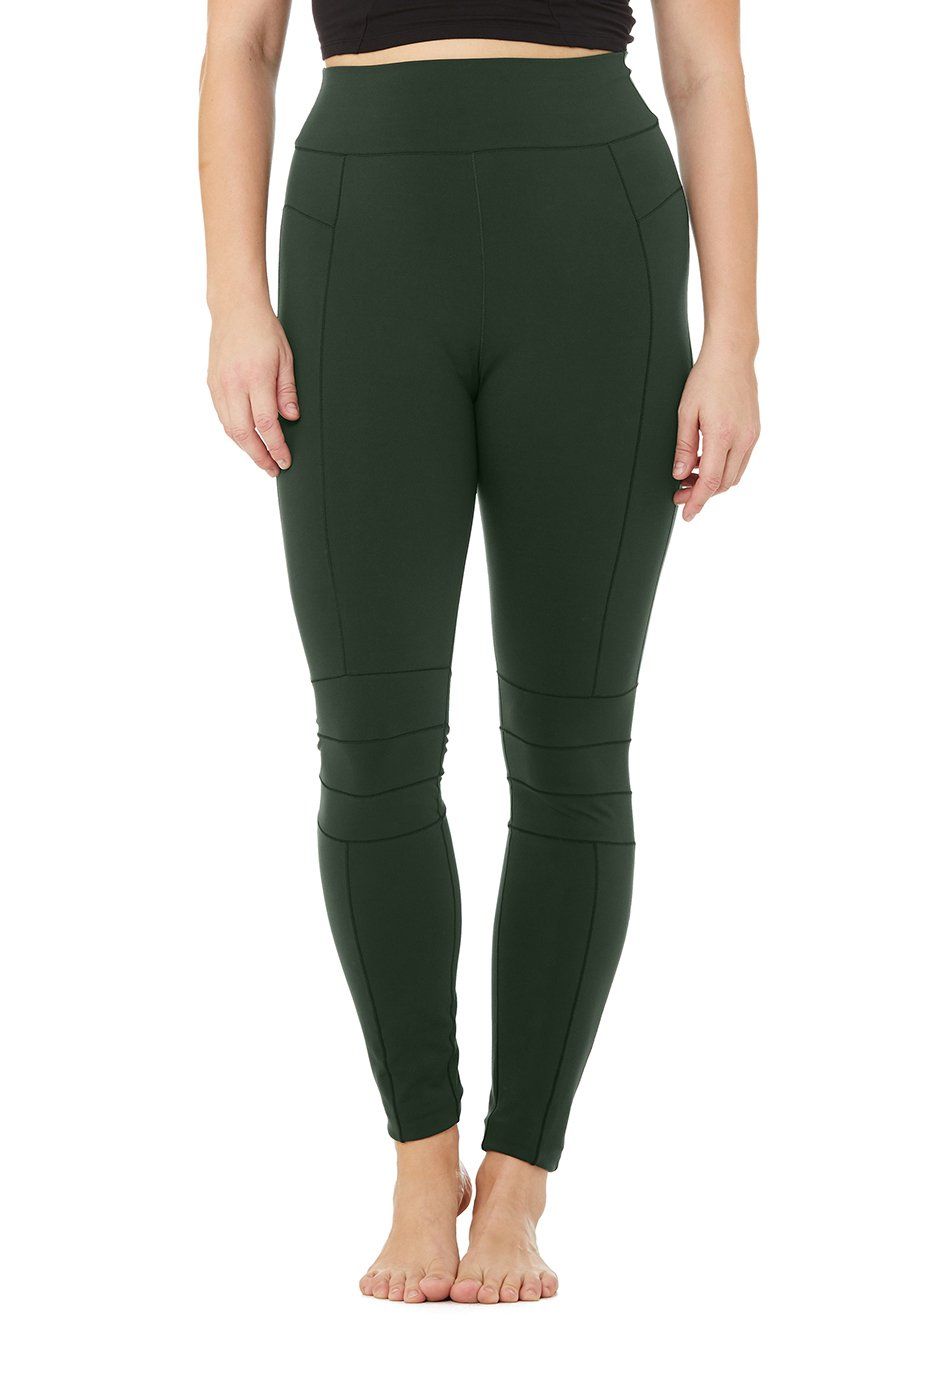 Fall Forest Green Leggings by Alo Yoga